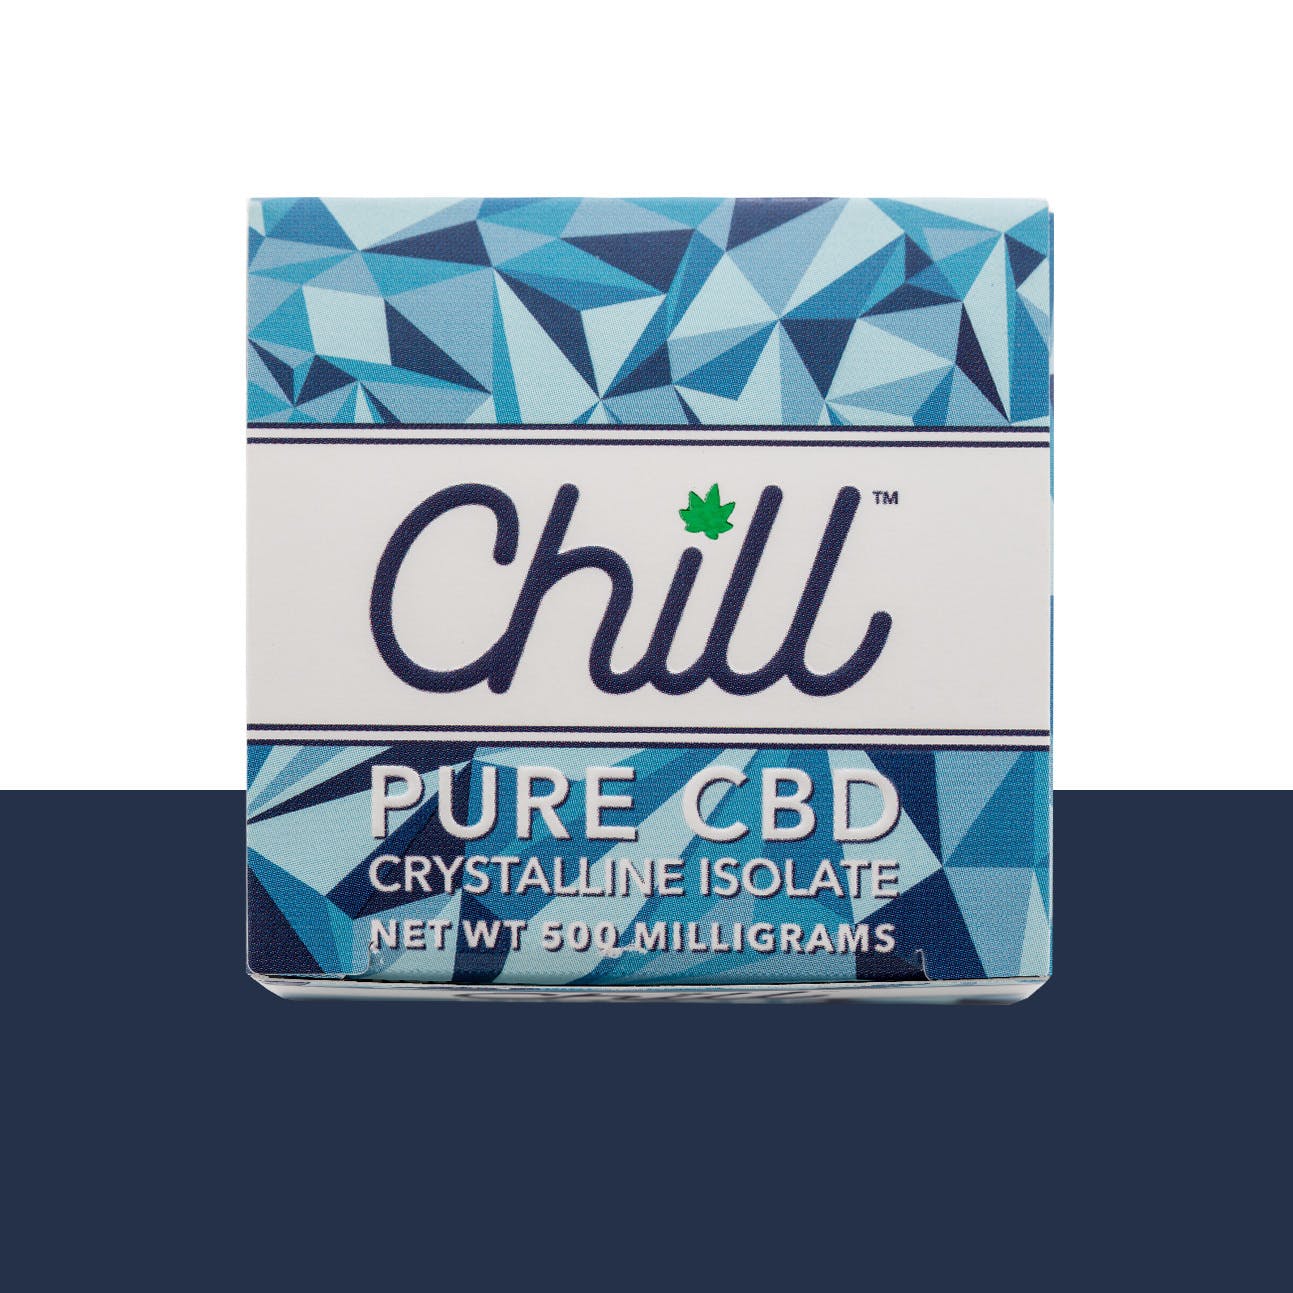 concentrate-chill-pure-cbd-crystalline-isolate-500-milligrams